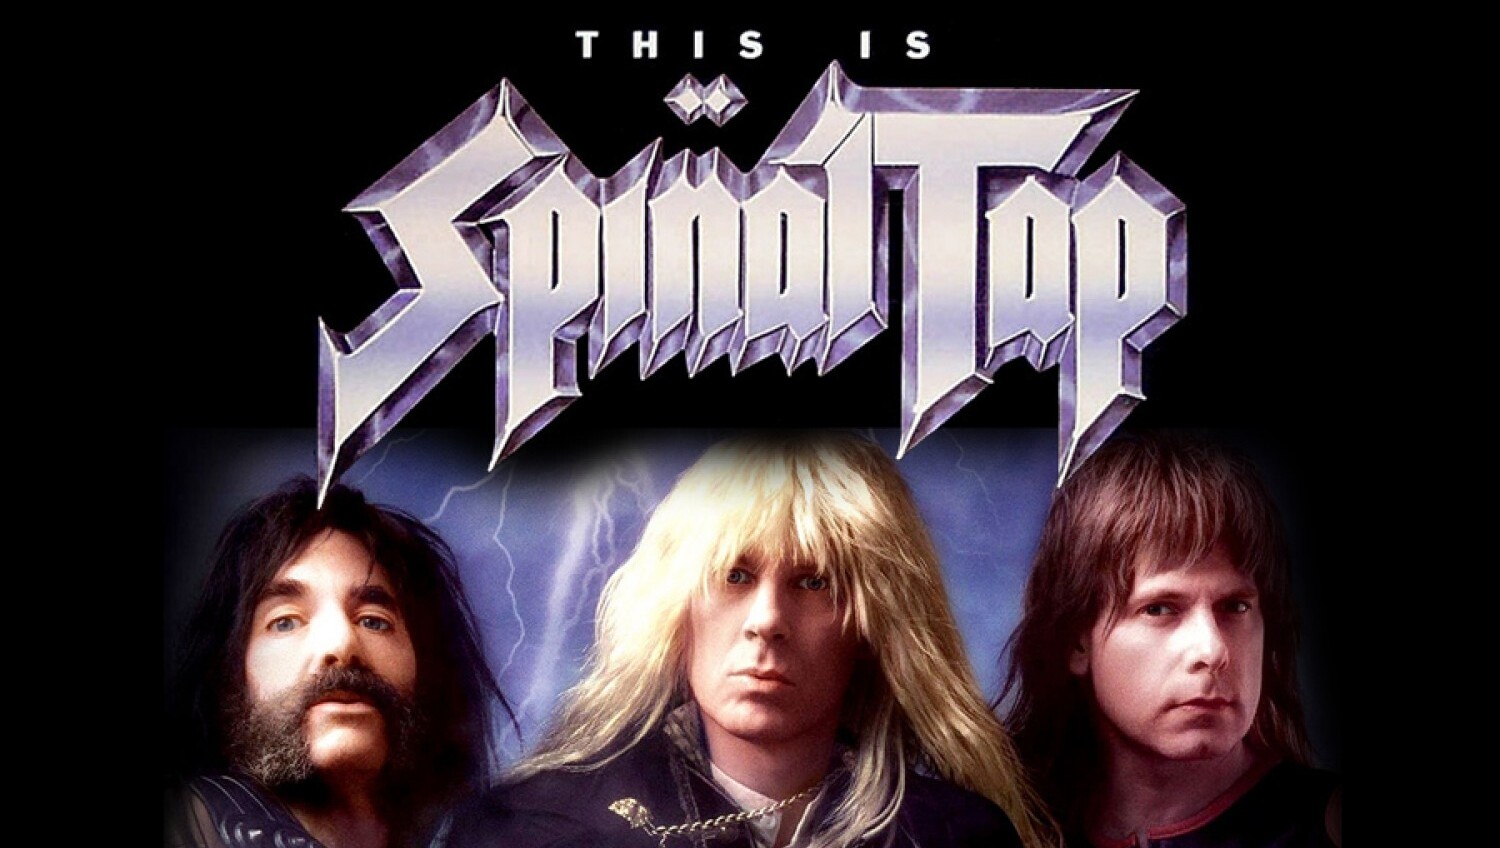 30-facts-about-the-movie-this-is-spinal-tap